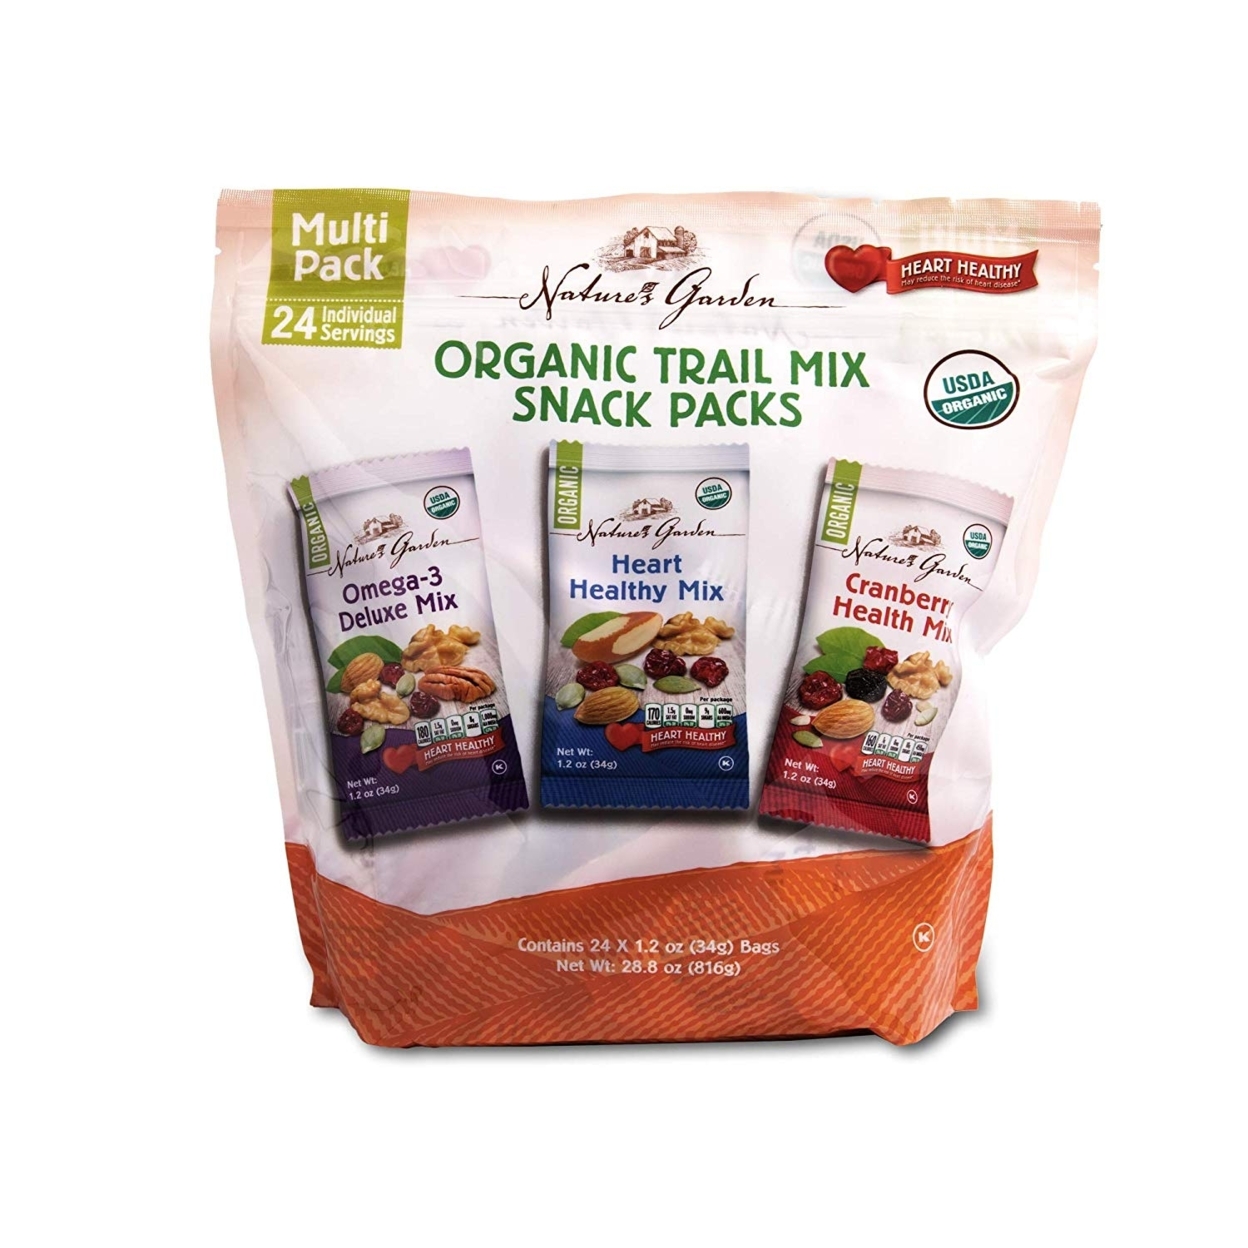 Nature's Garden Organic Trail Mix Snack Packs, Multi Pack 1.2 Oz - Pack Of 24